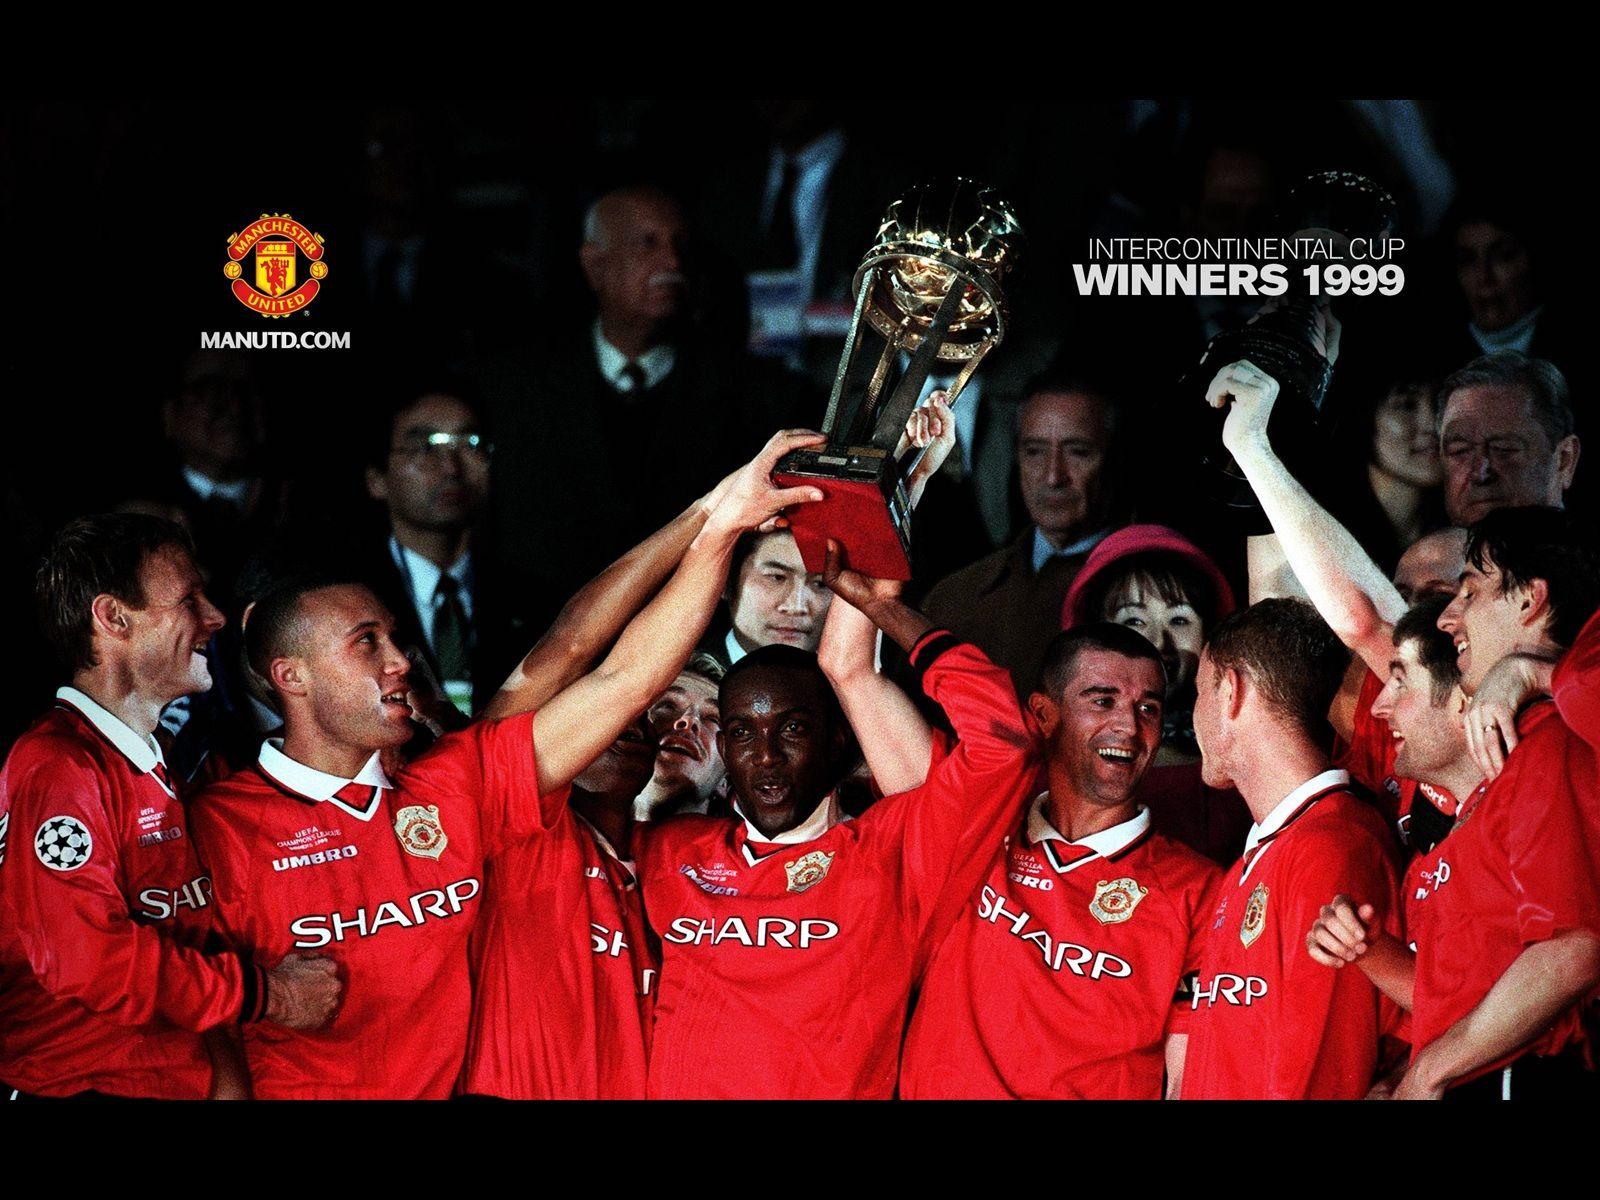 EXCLUSIVE WALLPAPER. MANCHESTER UNITED TRHOPIES. #united family